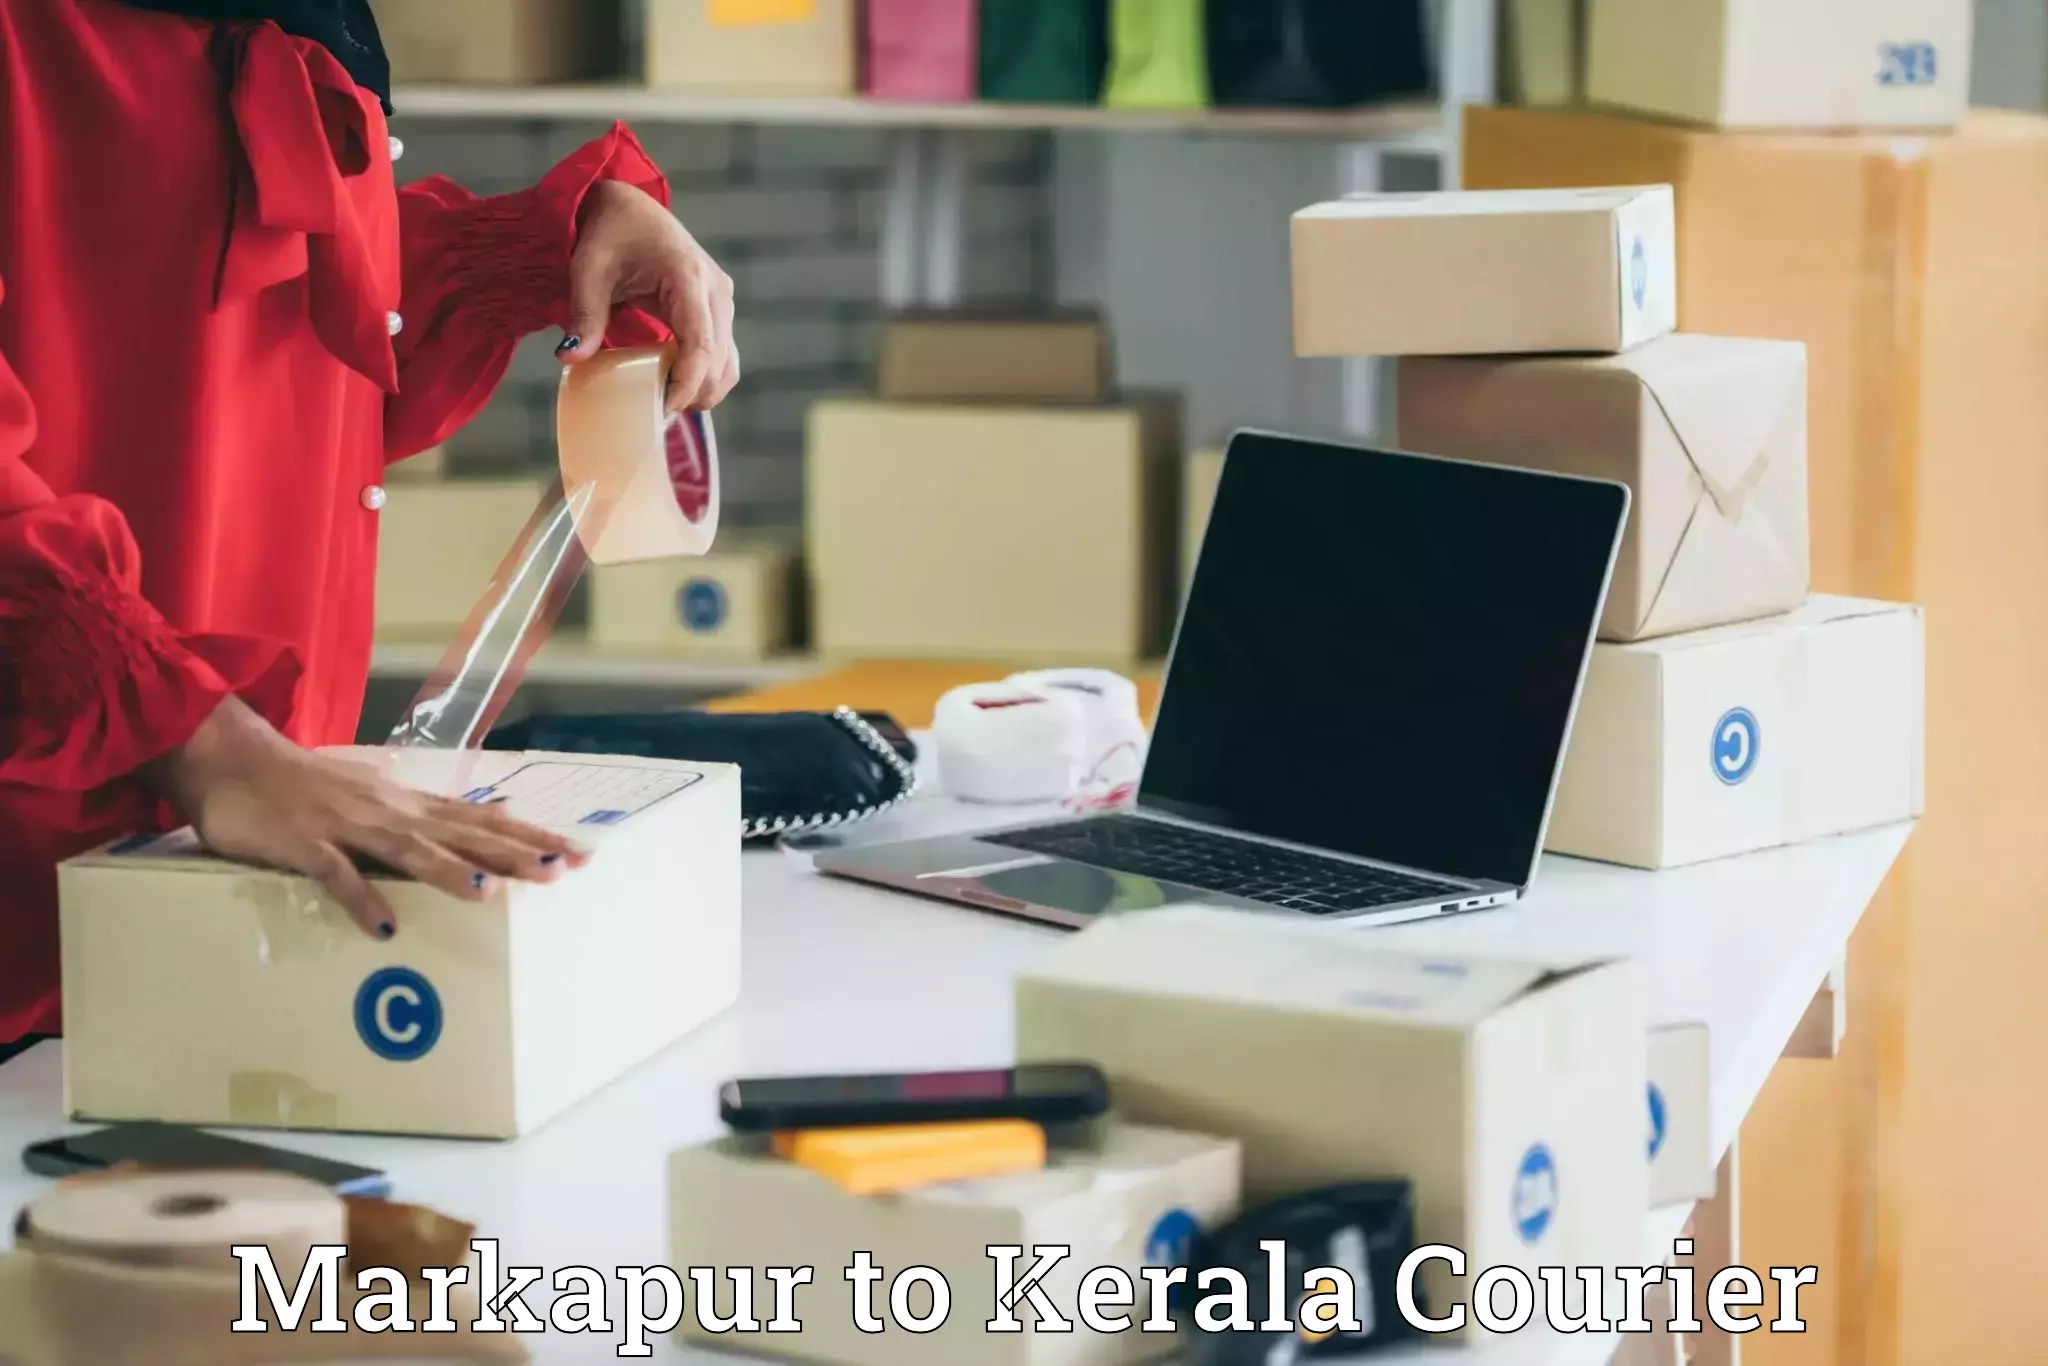 Courier service innovation Markapur to Trivandrum